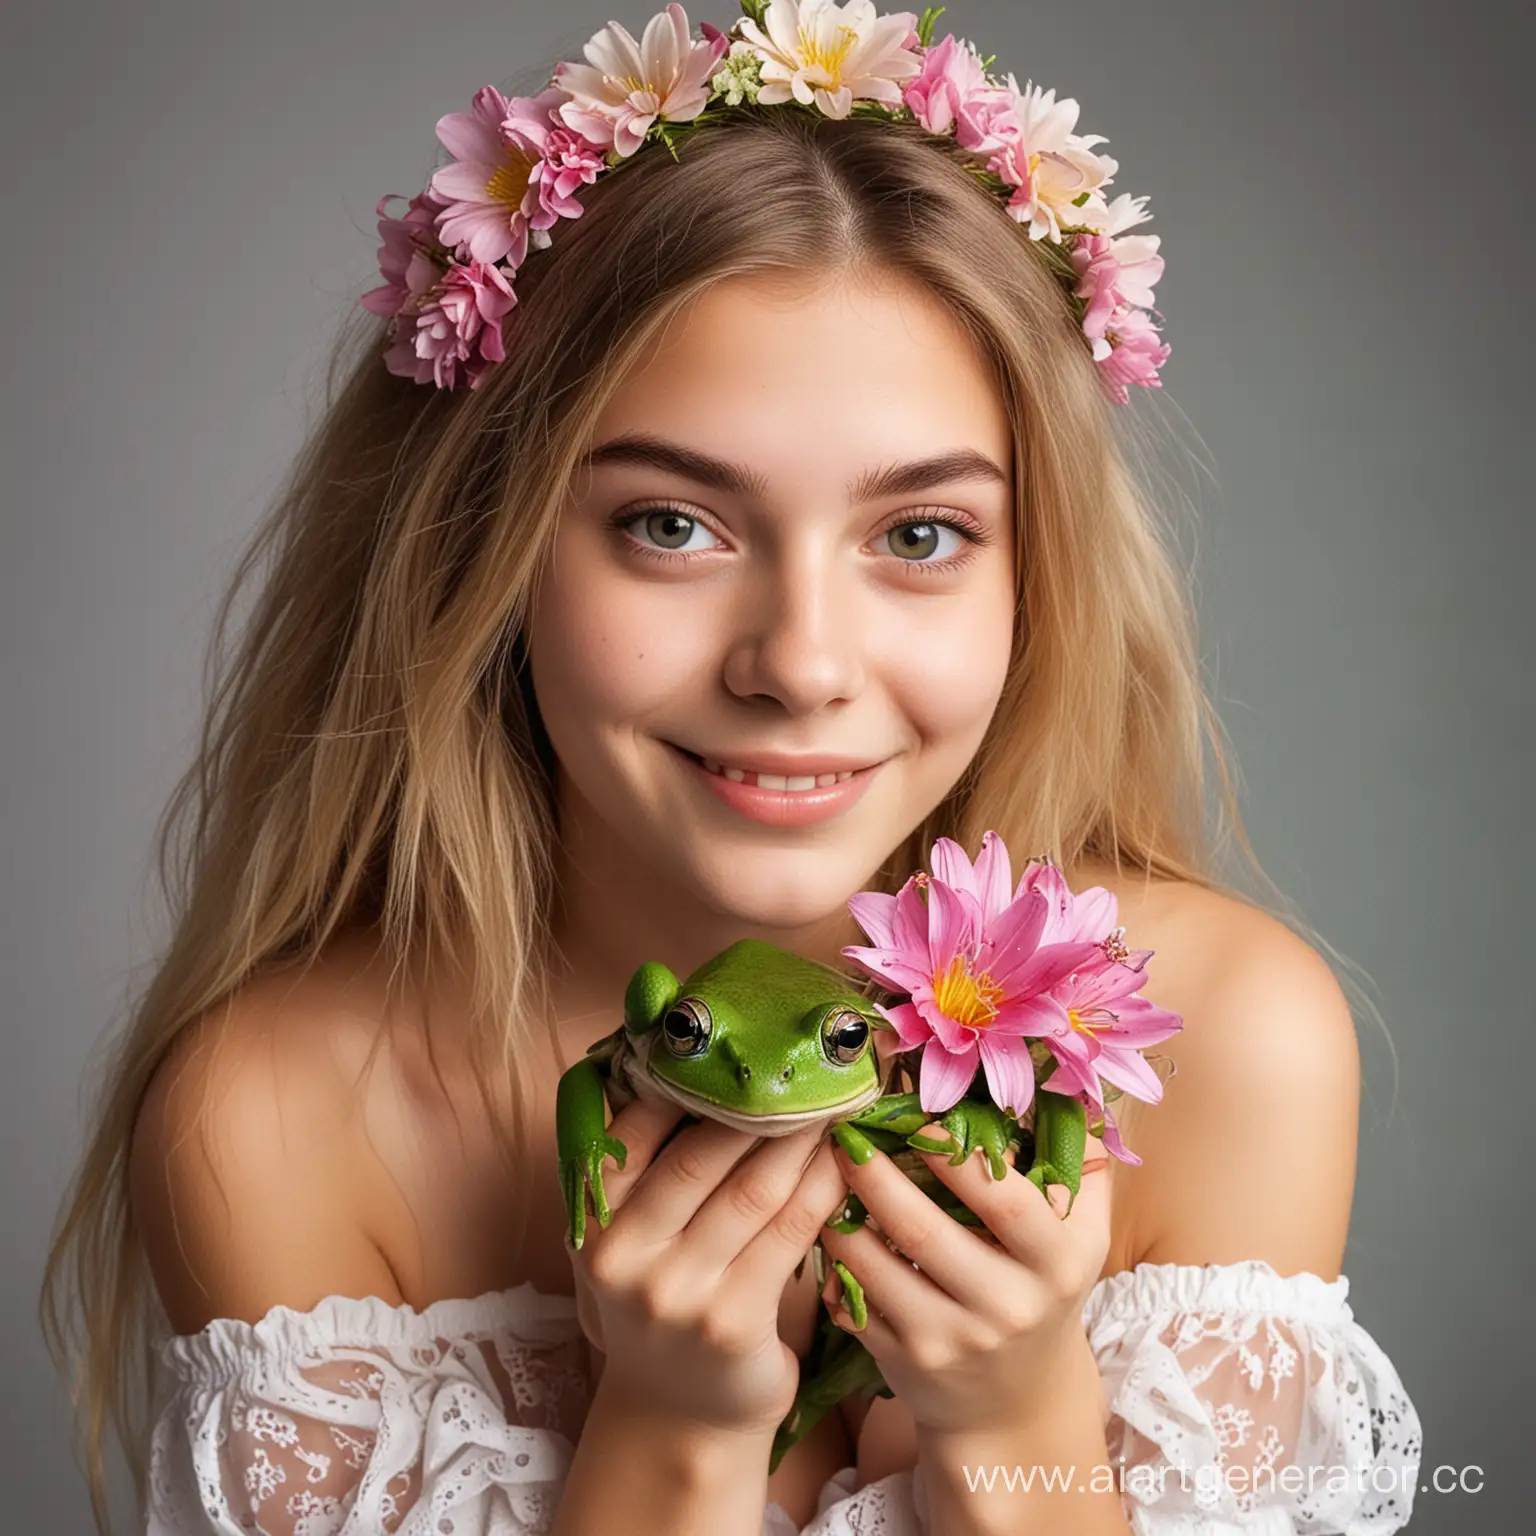 Young-Woman-with-Frog-and-Flowers-Whimsical-Portrait-of-a-Teenage-Girl-with-Natures-Charms